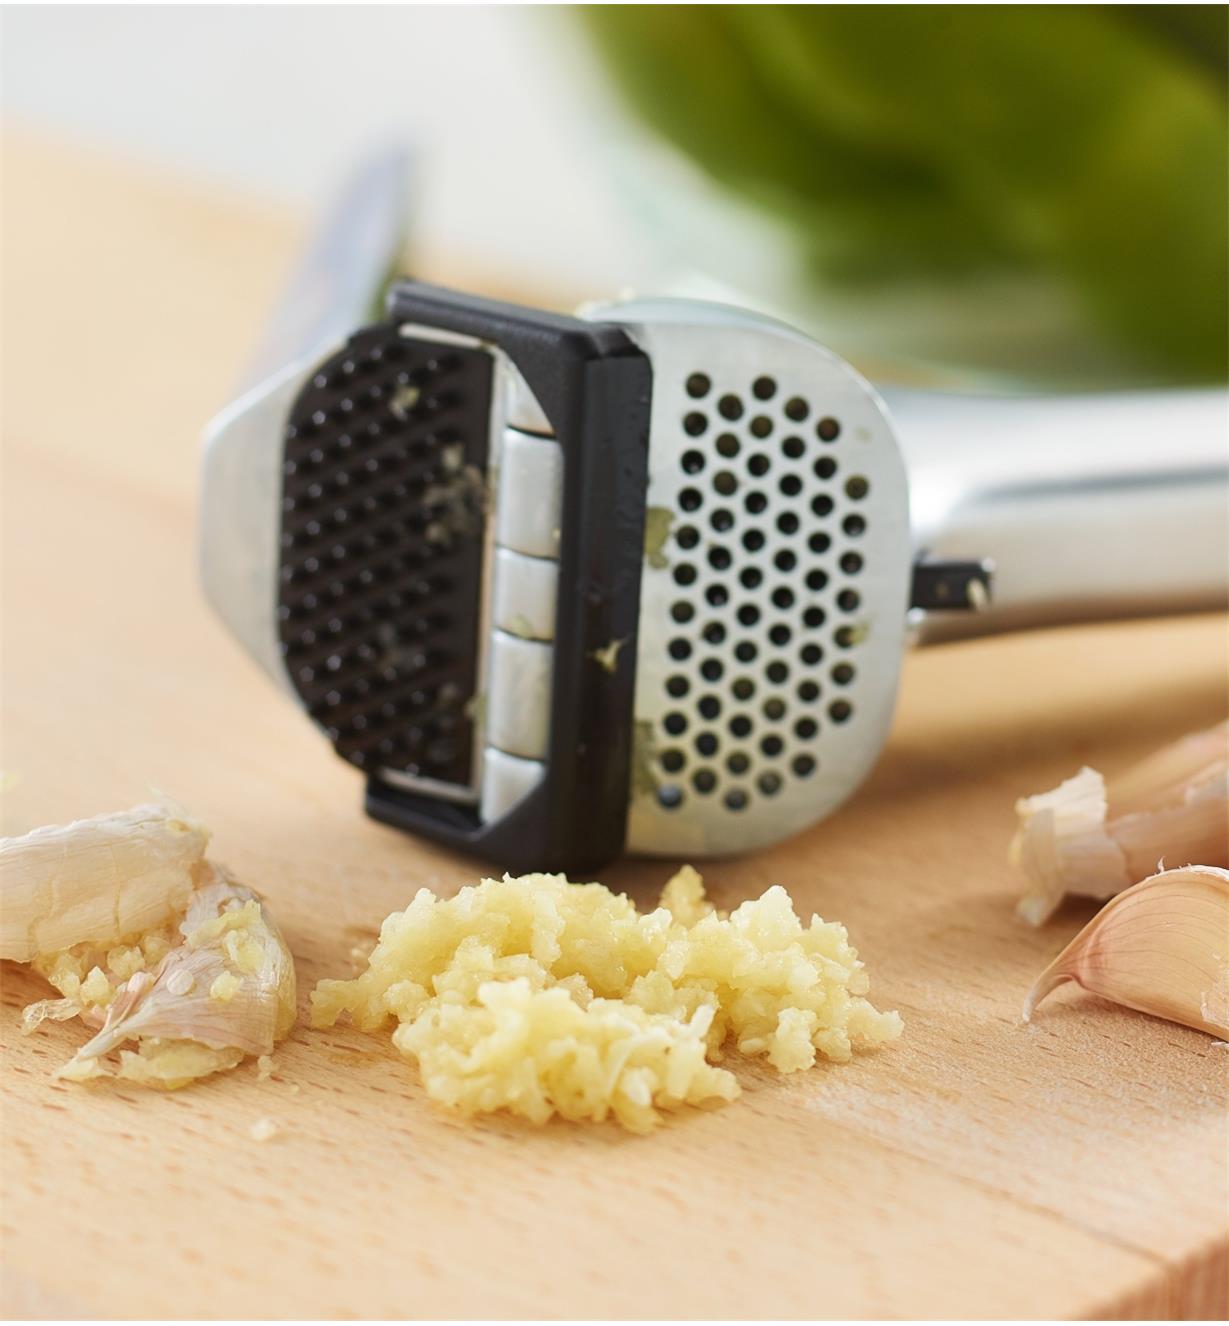 Crushed garlic and peel on a cutting board with the Garject Garlic Press